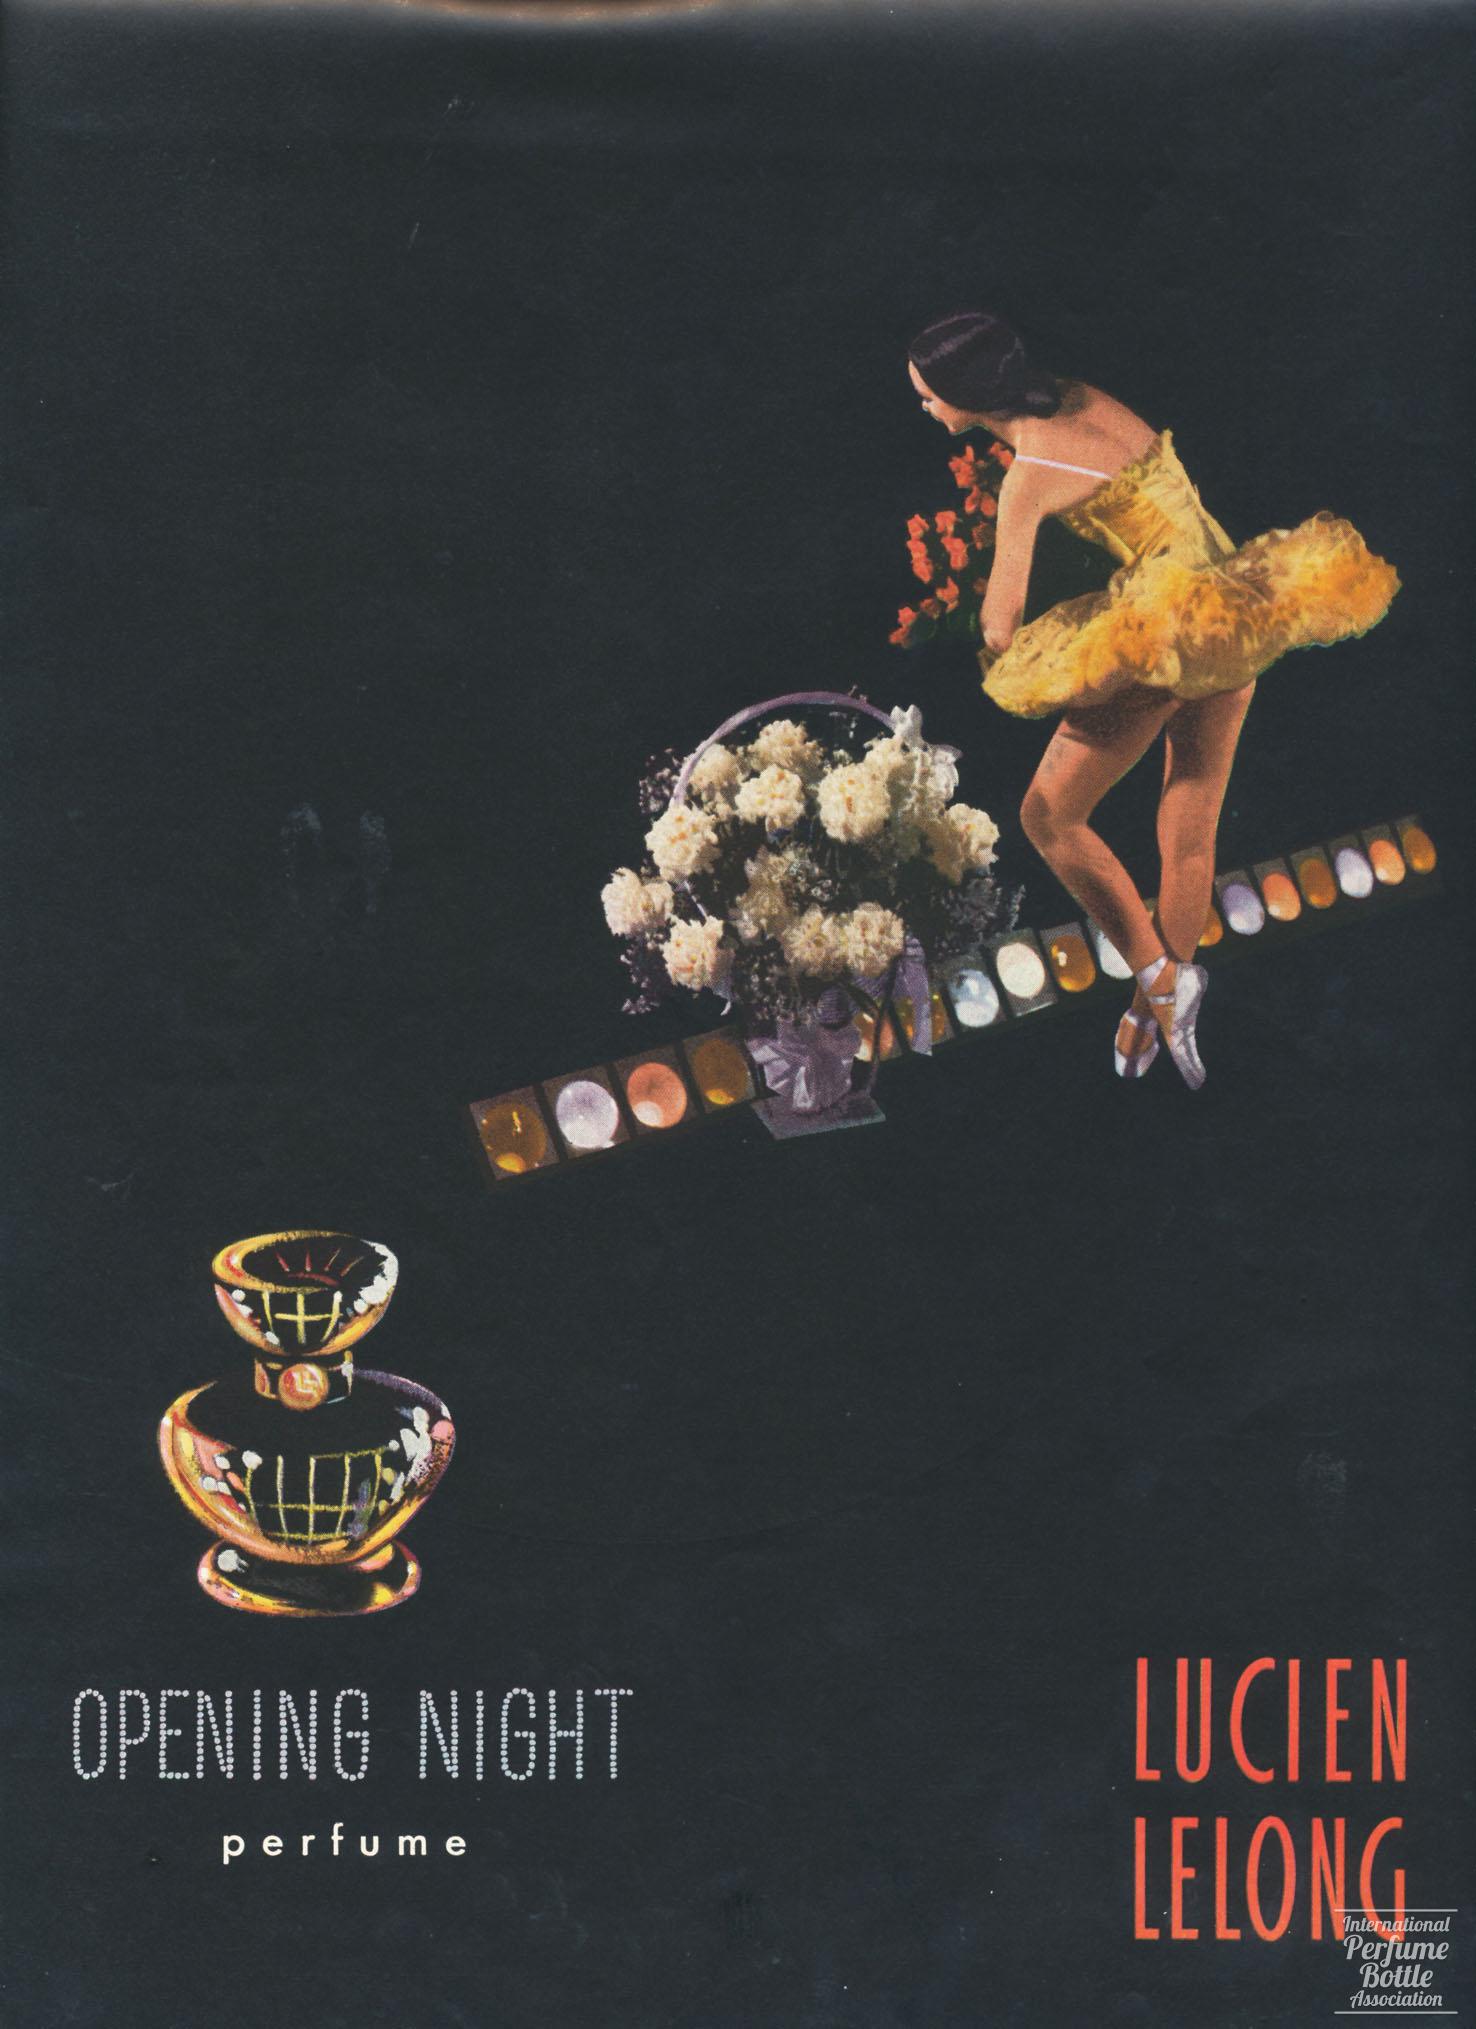 "Opening Night" by Lucien Lelong Advertisement - 1946